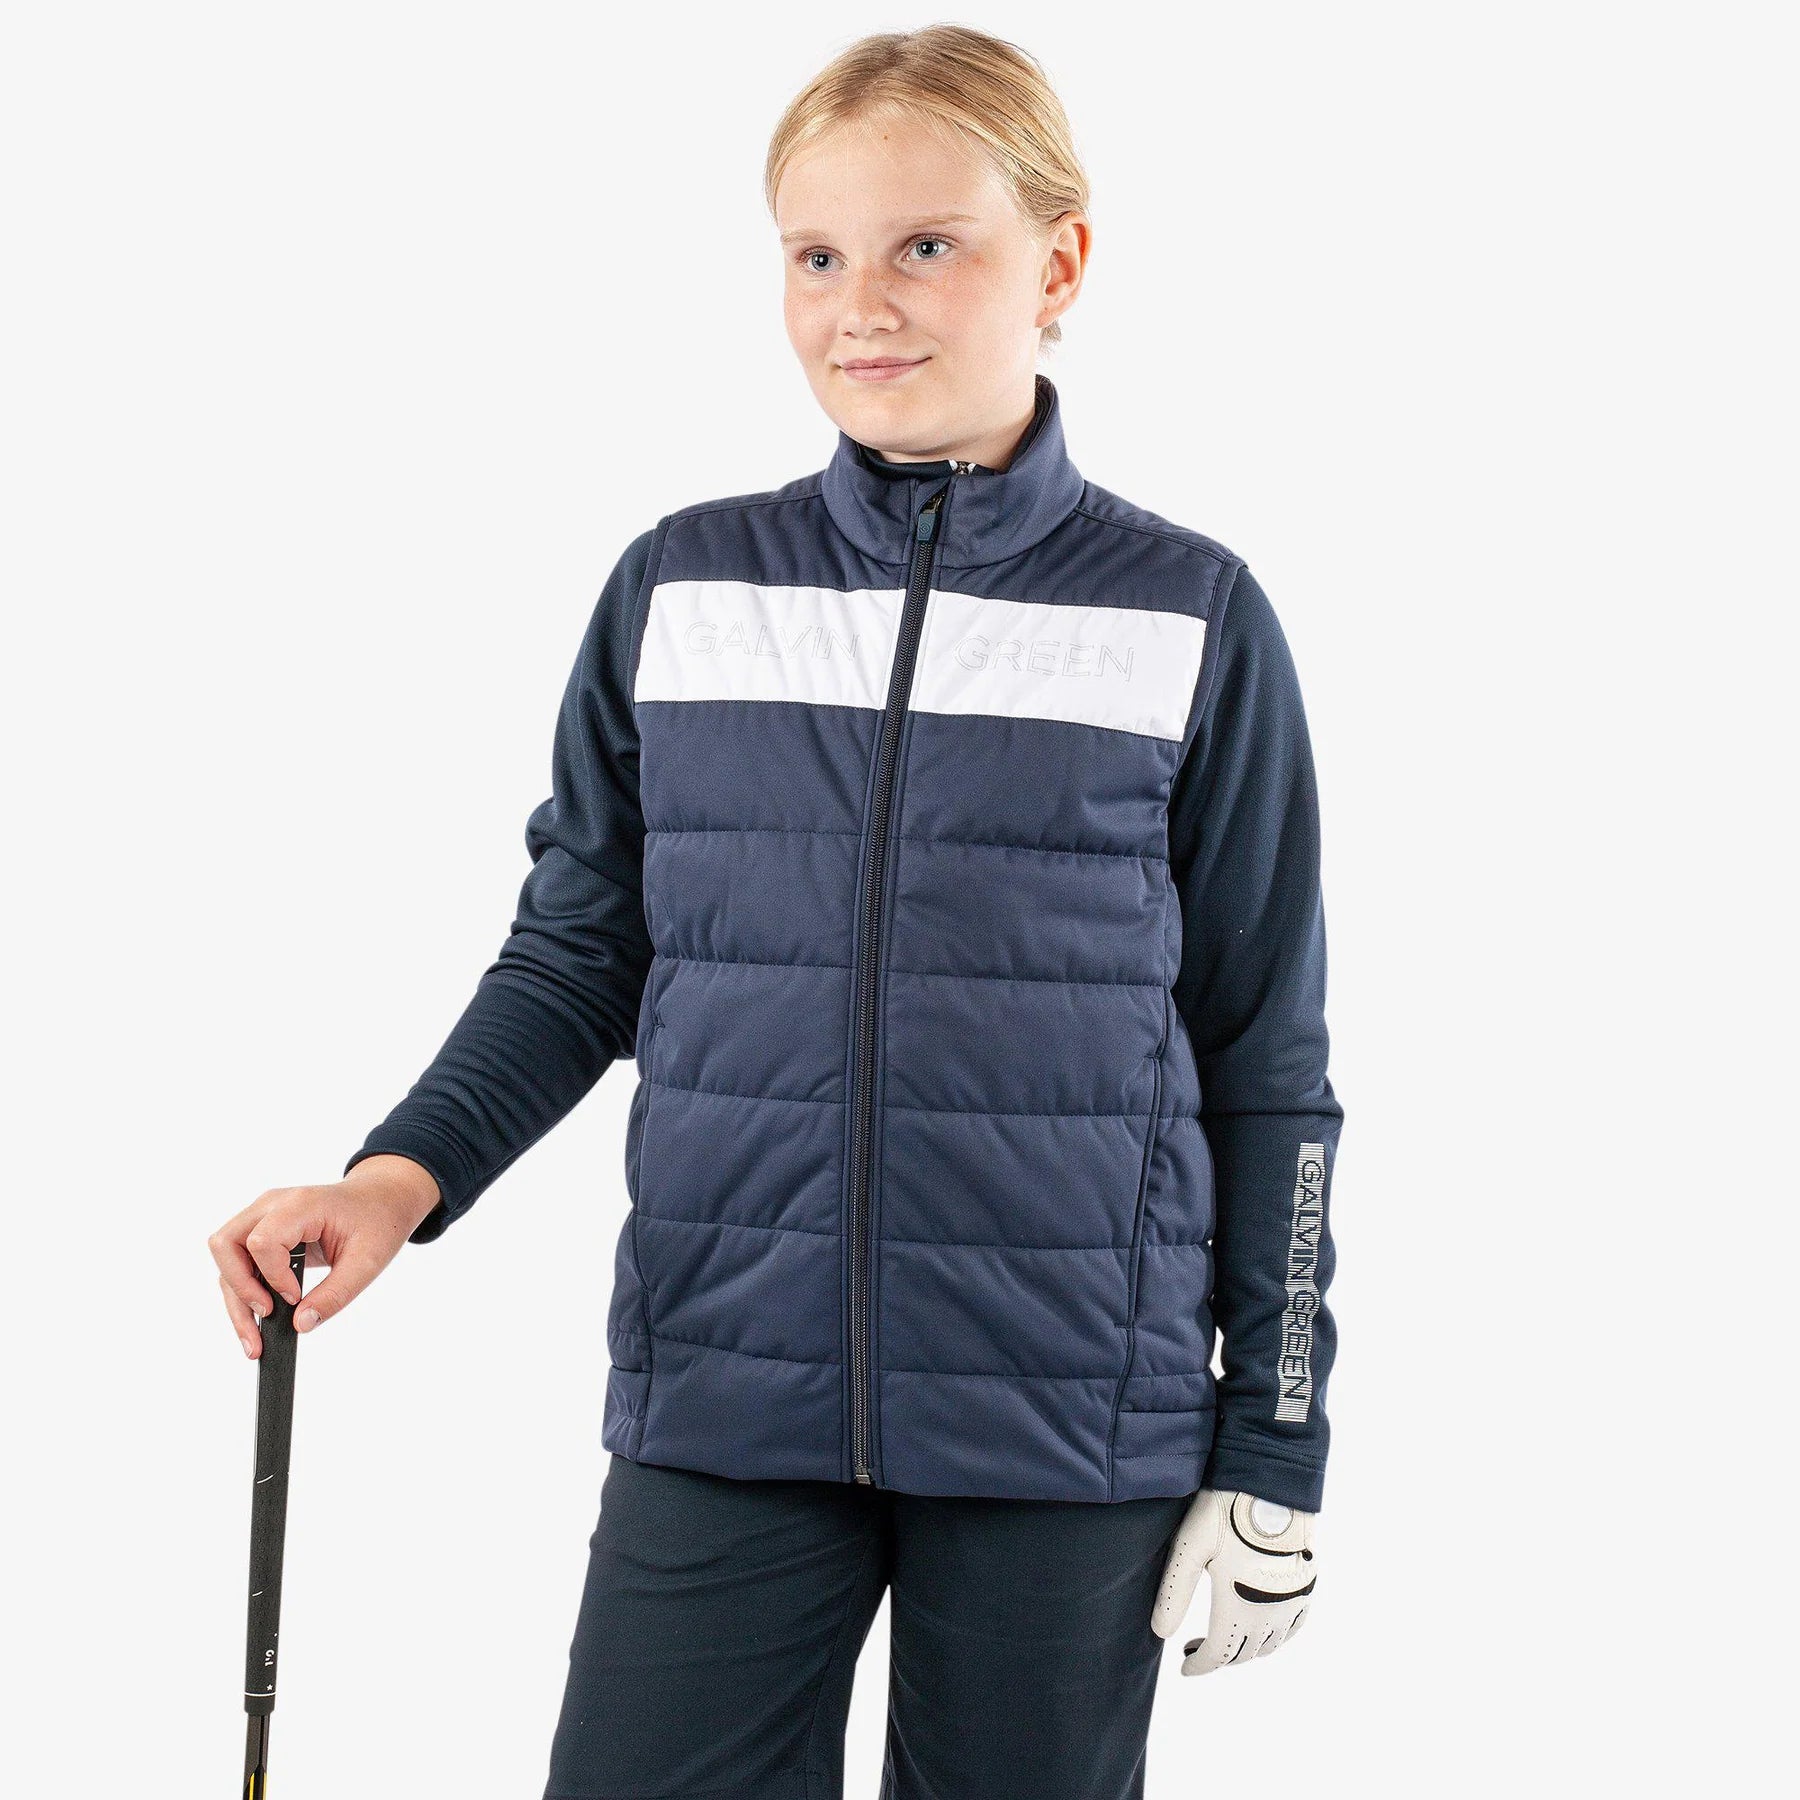 GALVIN GREEN JUNIOR'S RONIE WINDPROOF AND WATER REPELLENT VEST Navy White